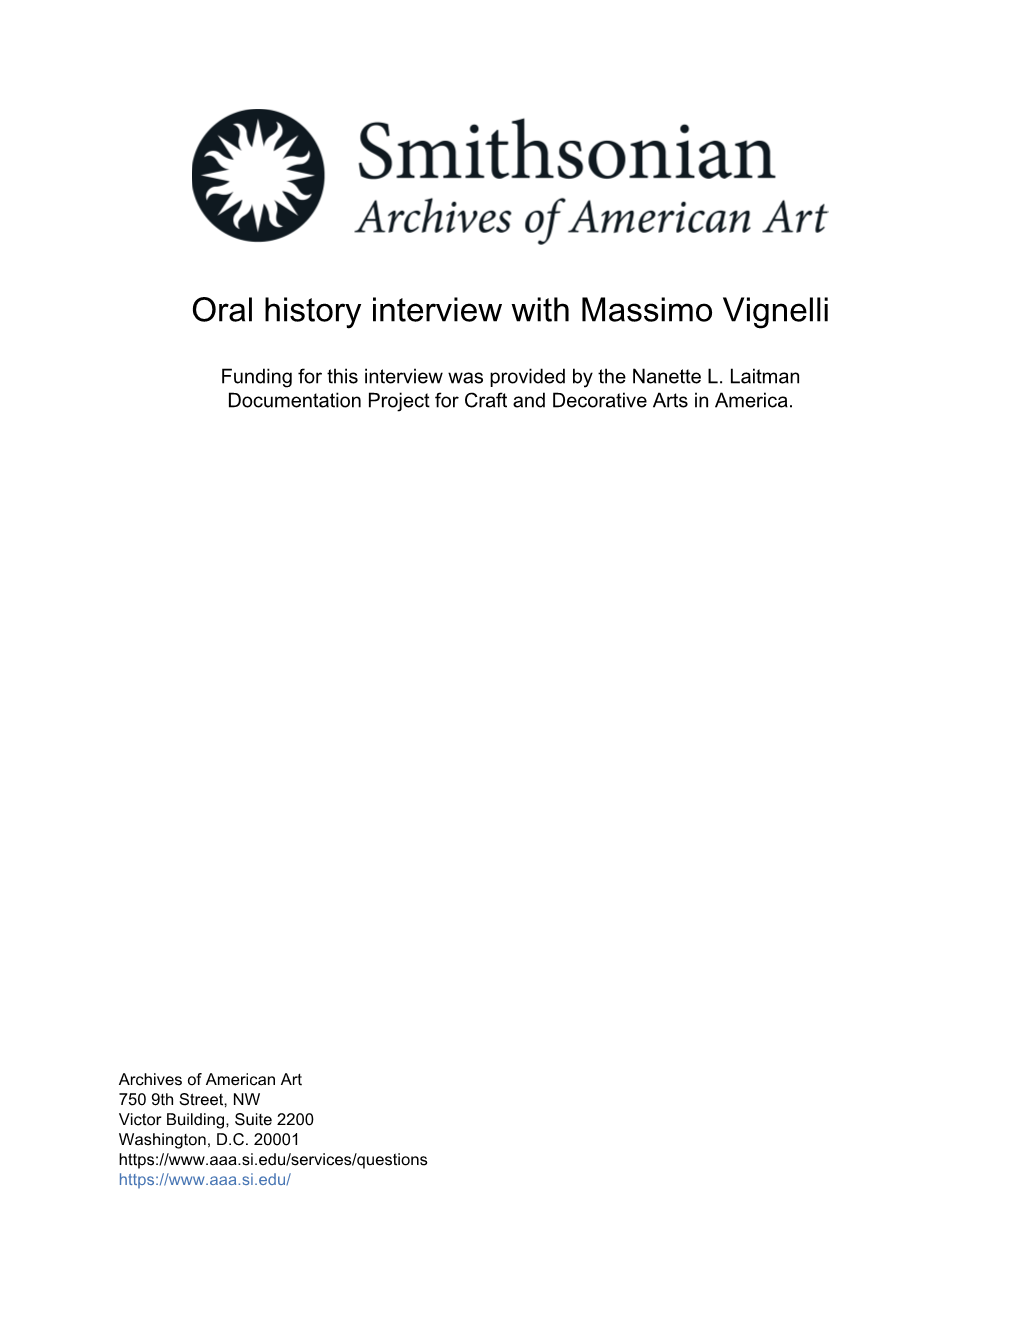 Oral History Interview with Massimo Vignelli